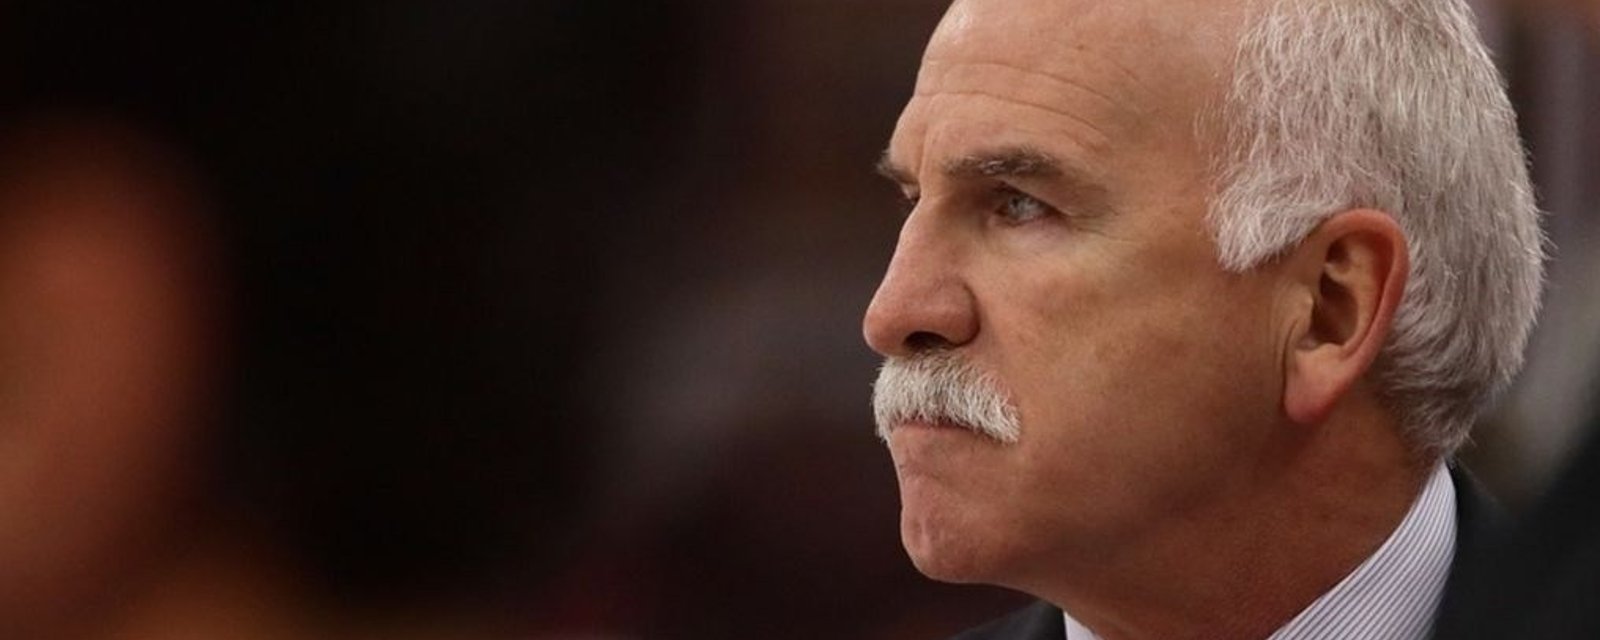 Breaking: Details revealed on what Quenneville plans to do next! 